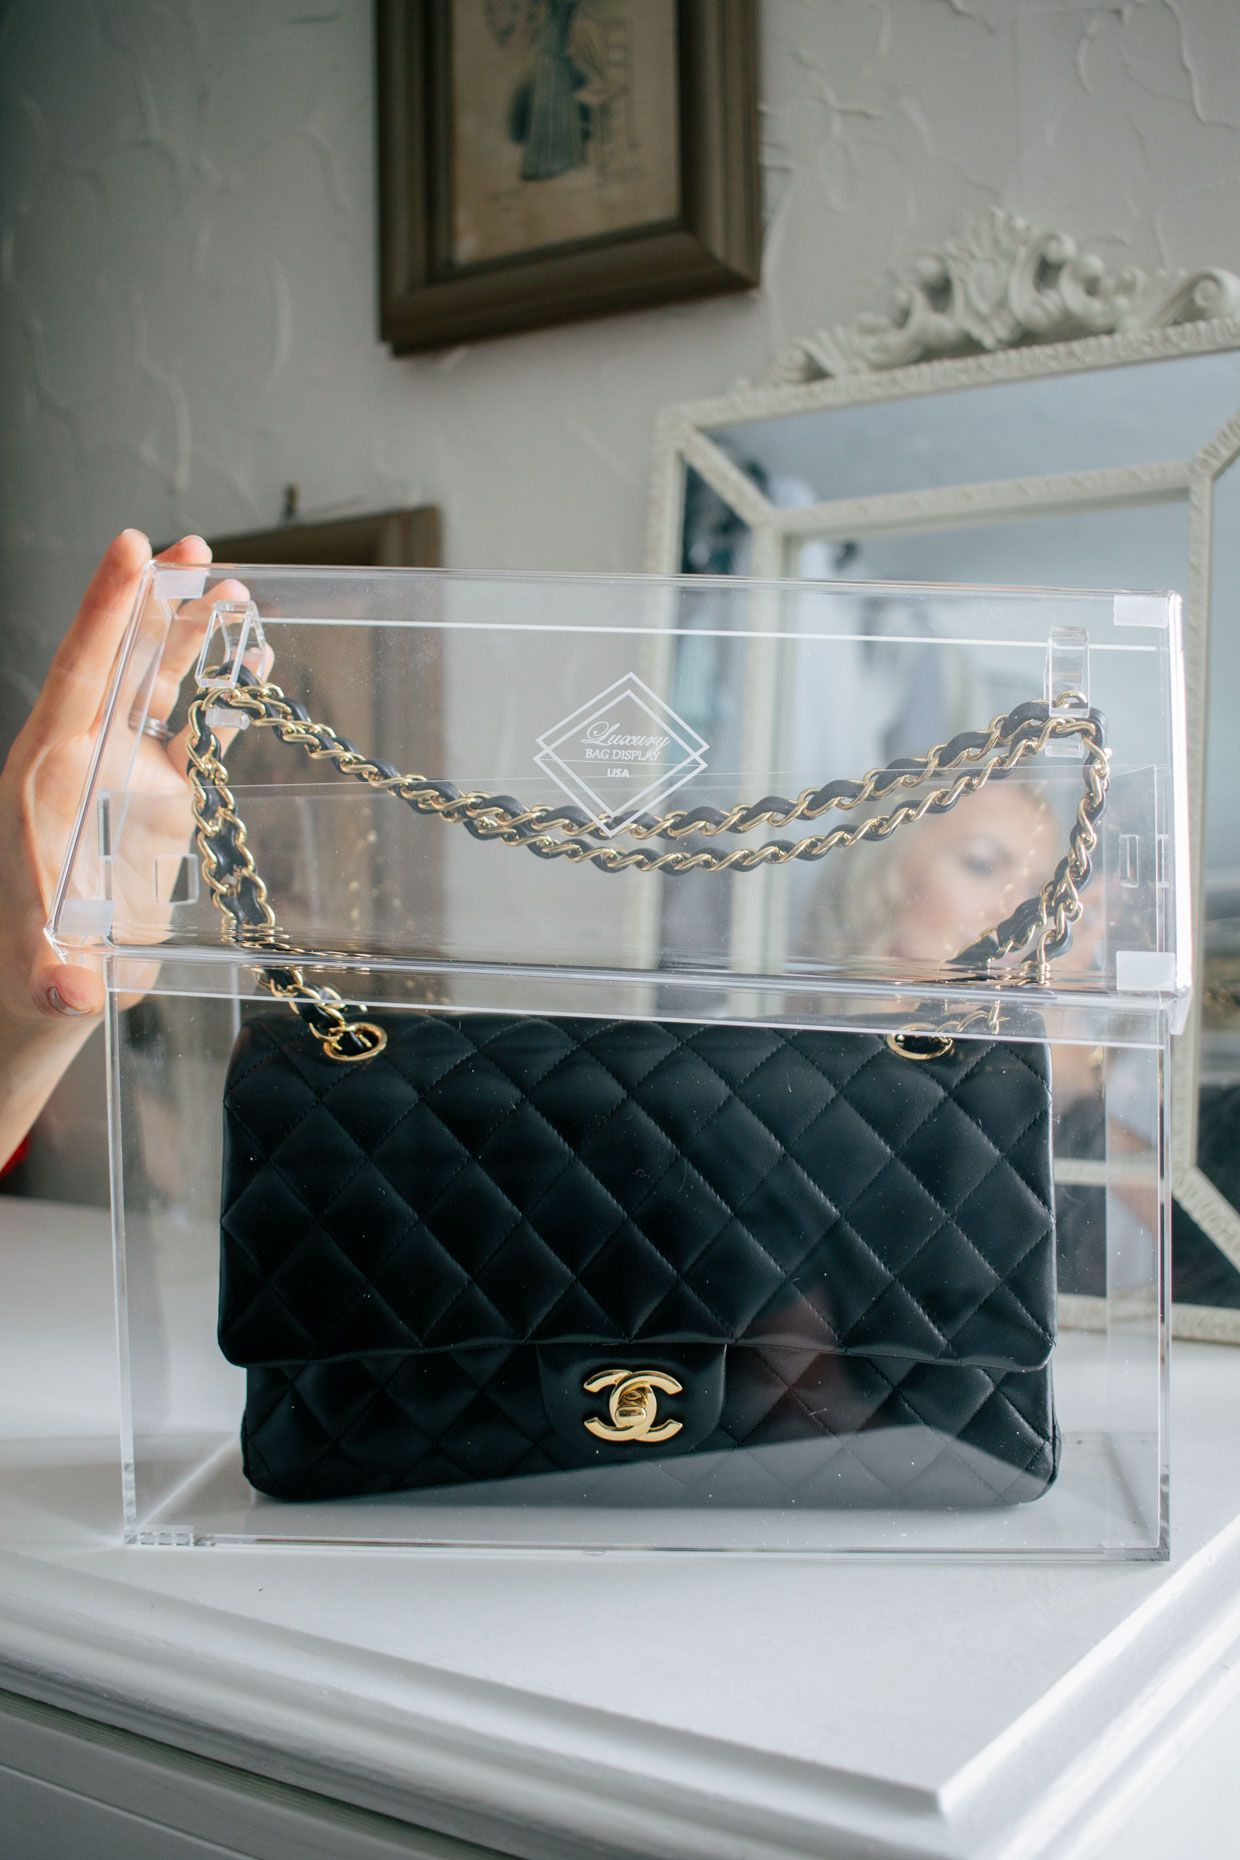 The Best Way to Store and Display Designer Handbags - Meagan's Moda